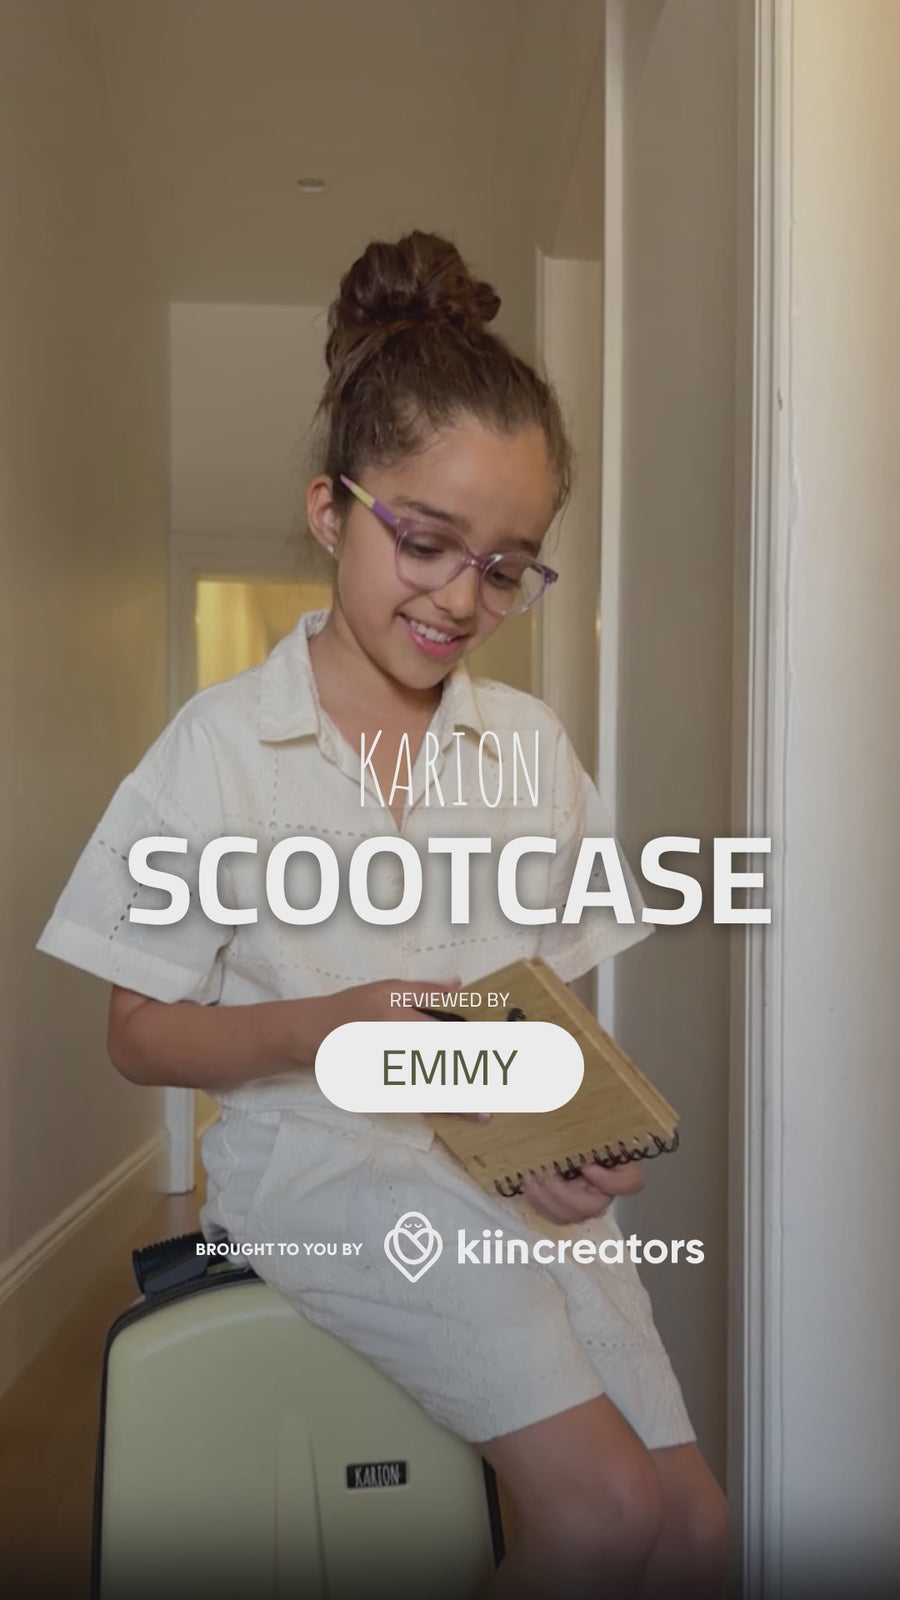 The Karion Scootcase